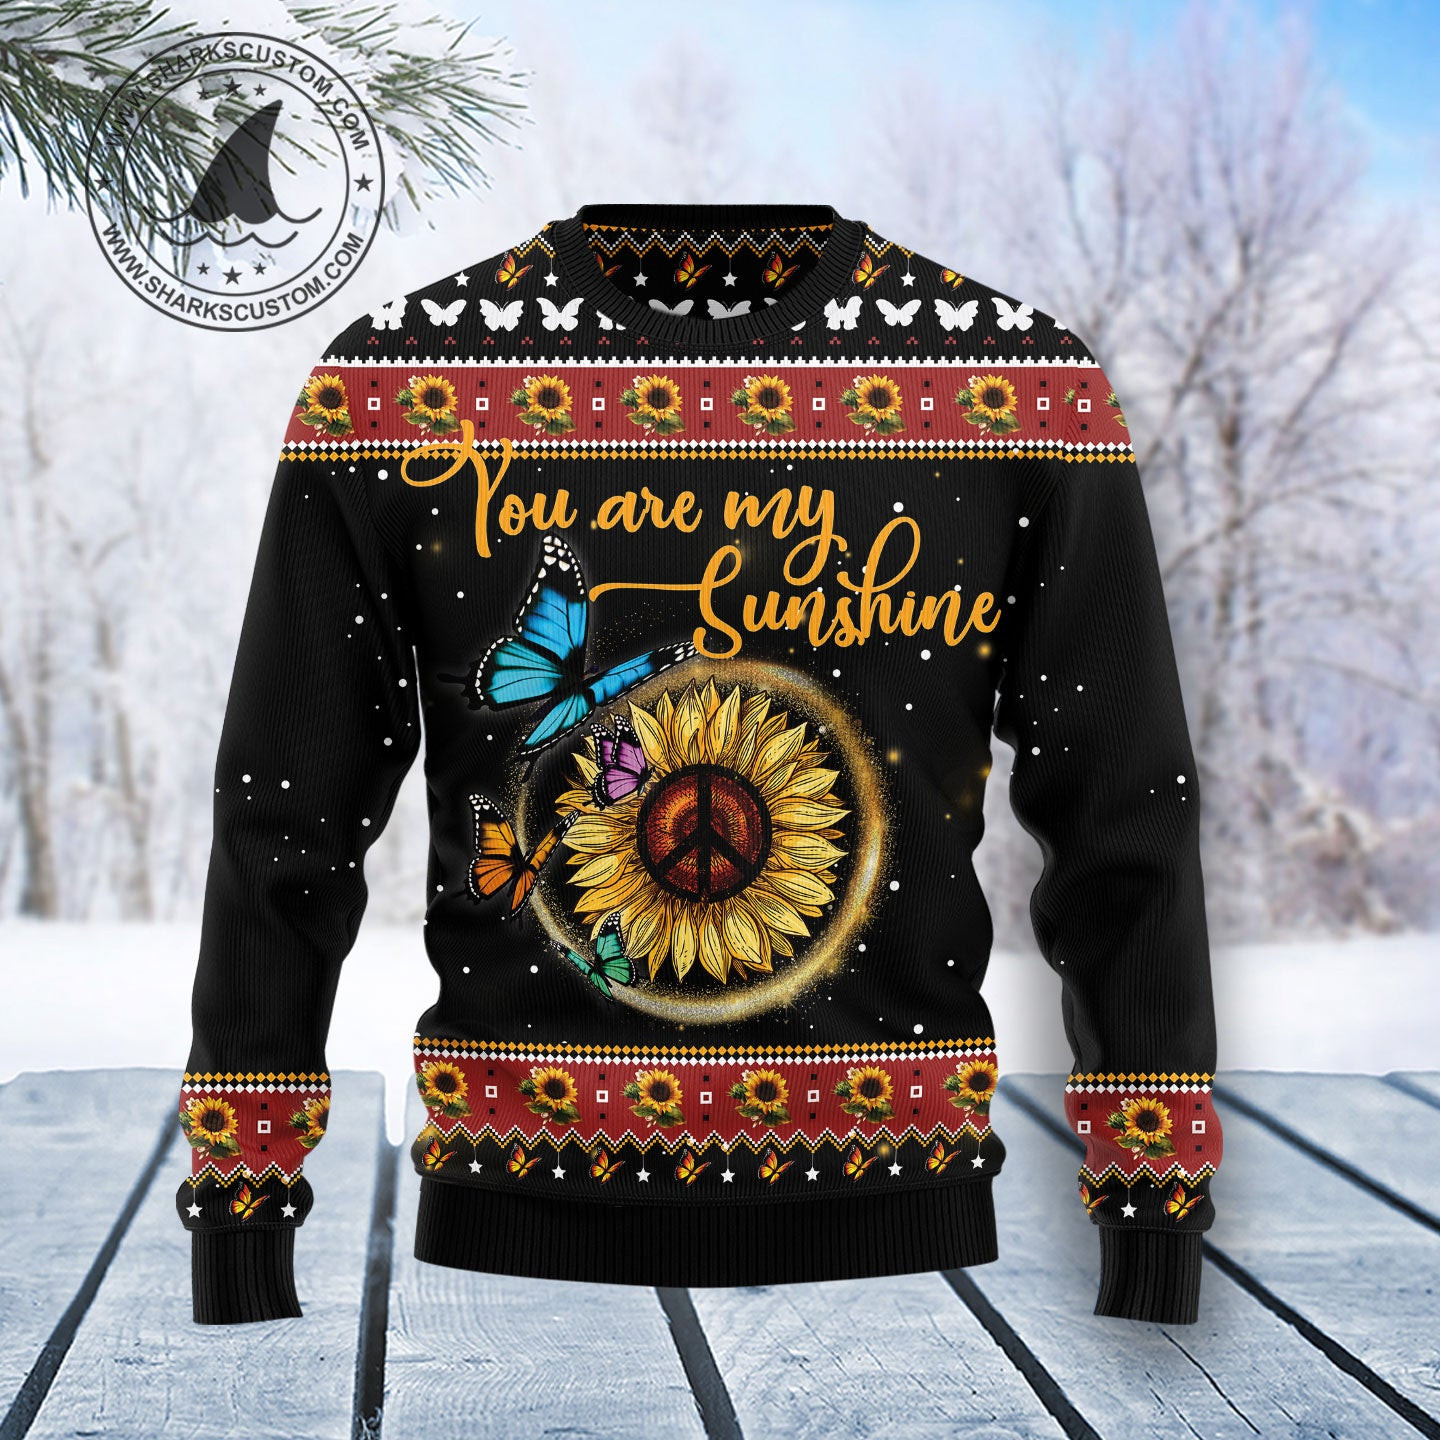 Butterfly Sunshine Ugly Christmas Sweater, Ugly Sweater For Men Women, Holiday Sweater